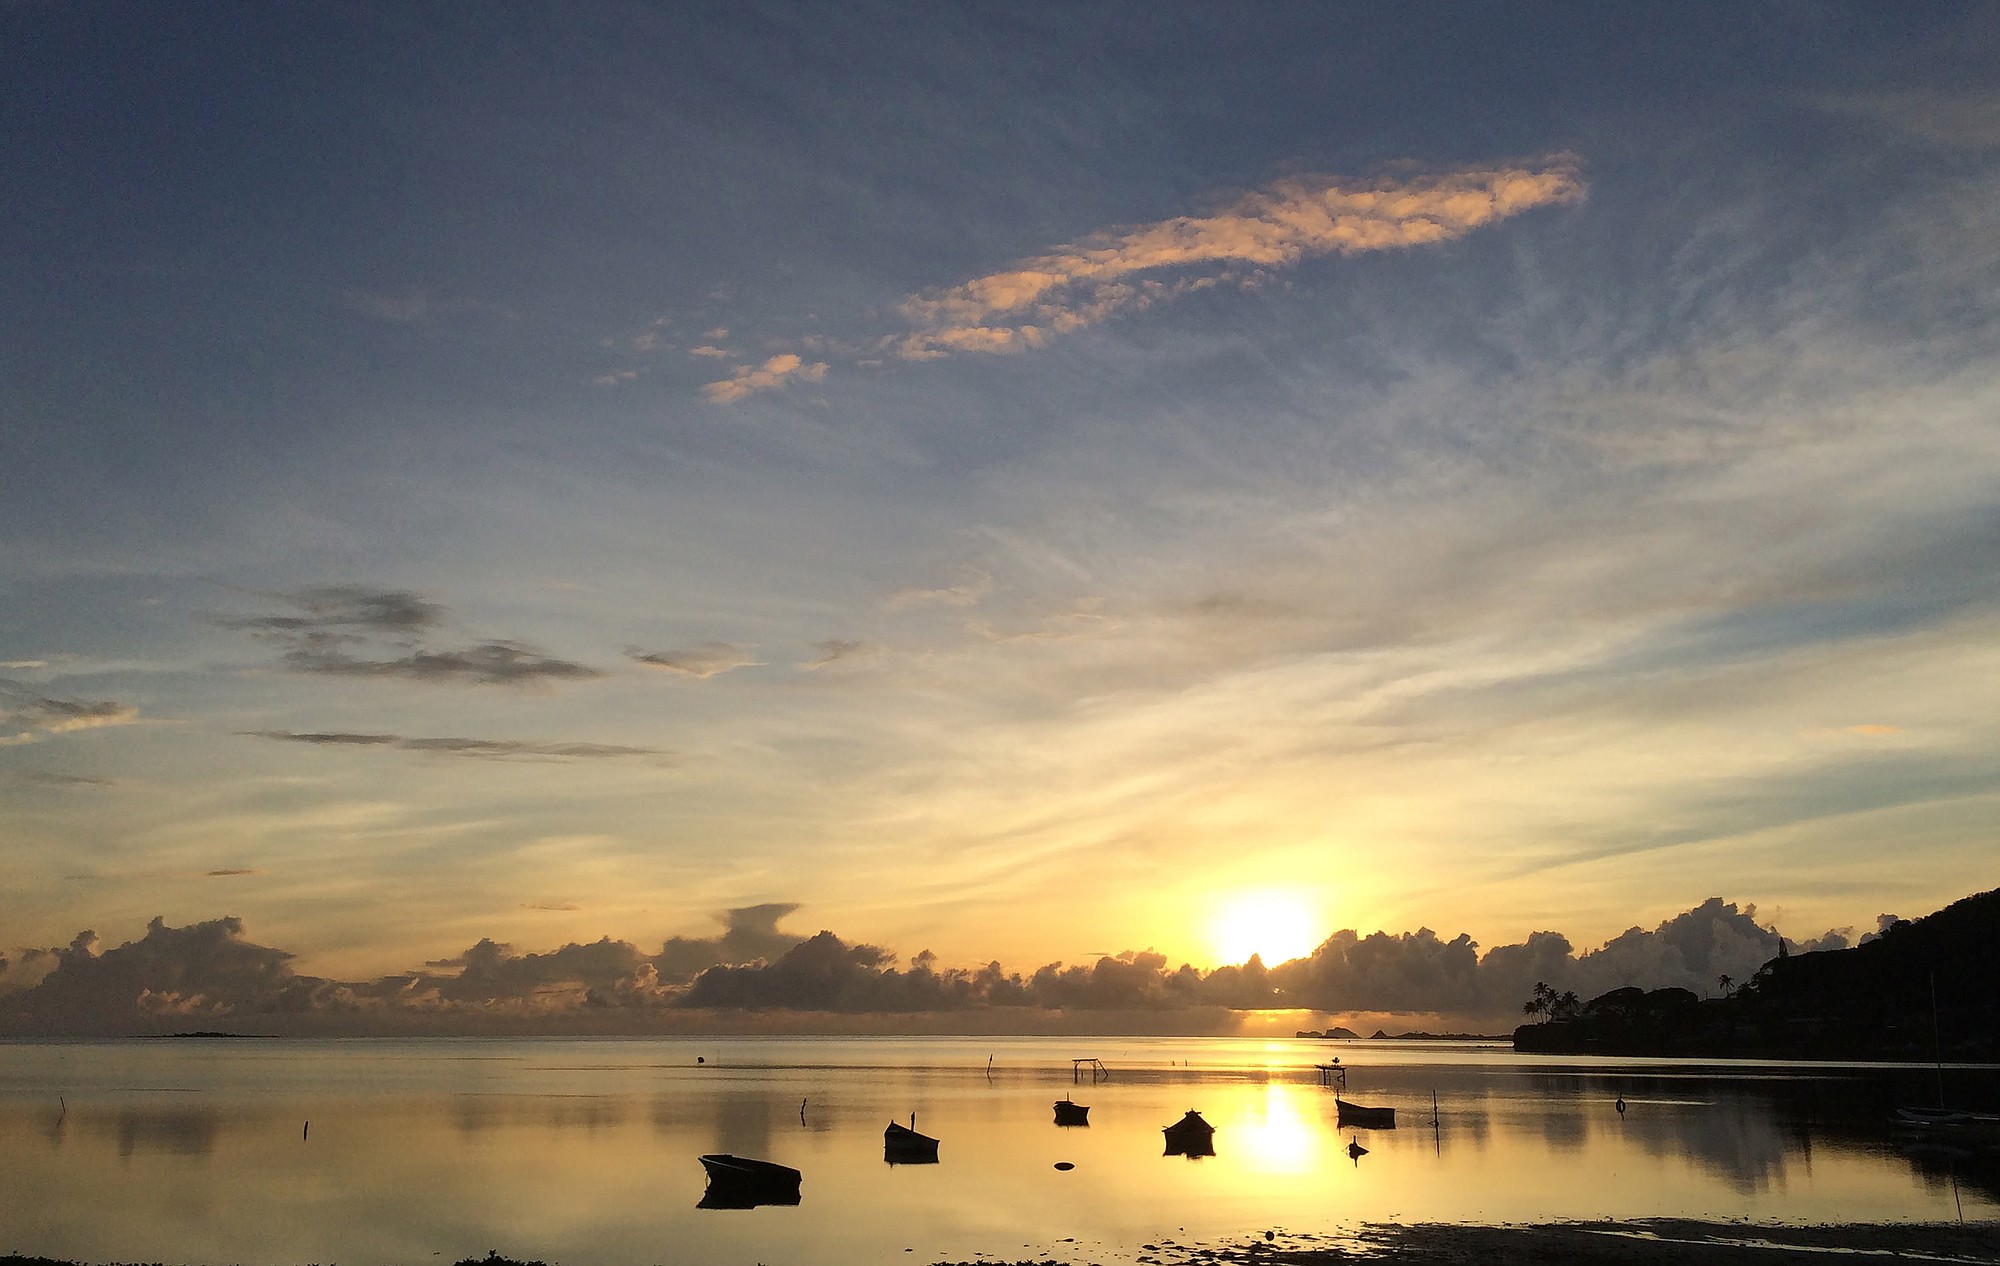 The sun rises Tuesday over Kaneohe Bay, which is closed to the public after heavy rains caused wastewater systems to overflow into the ocean in Kaneohe, Hawaii.